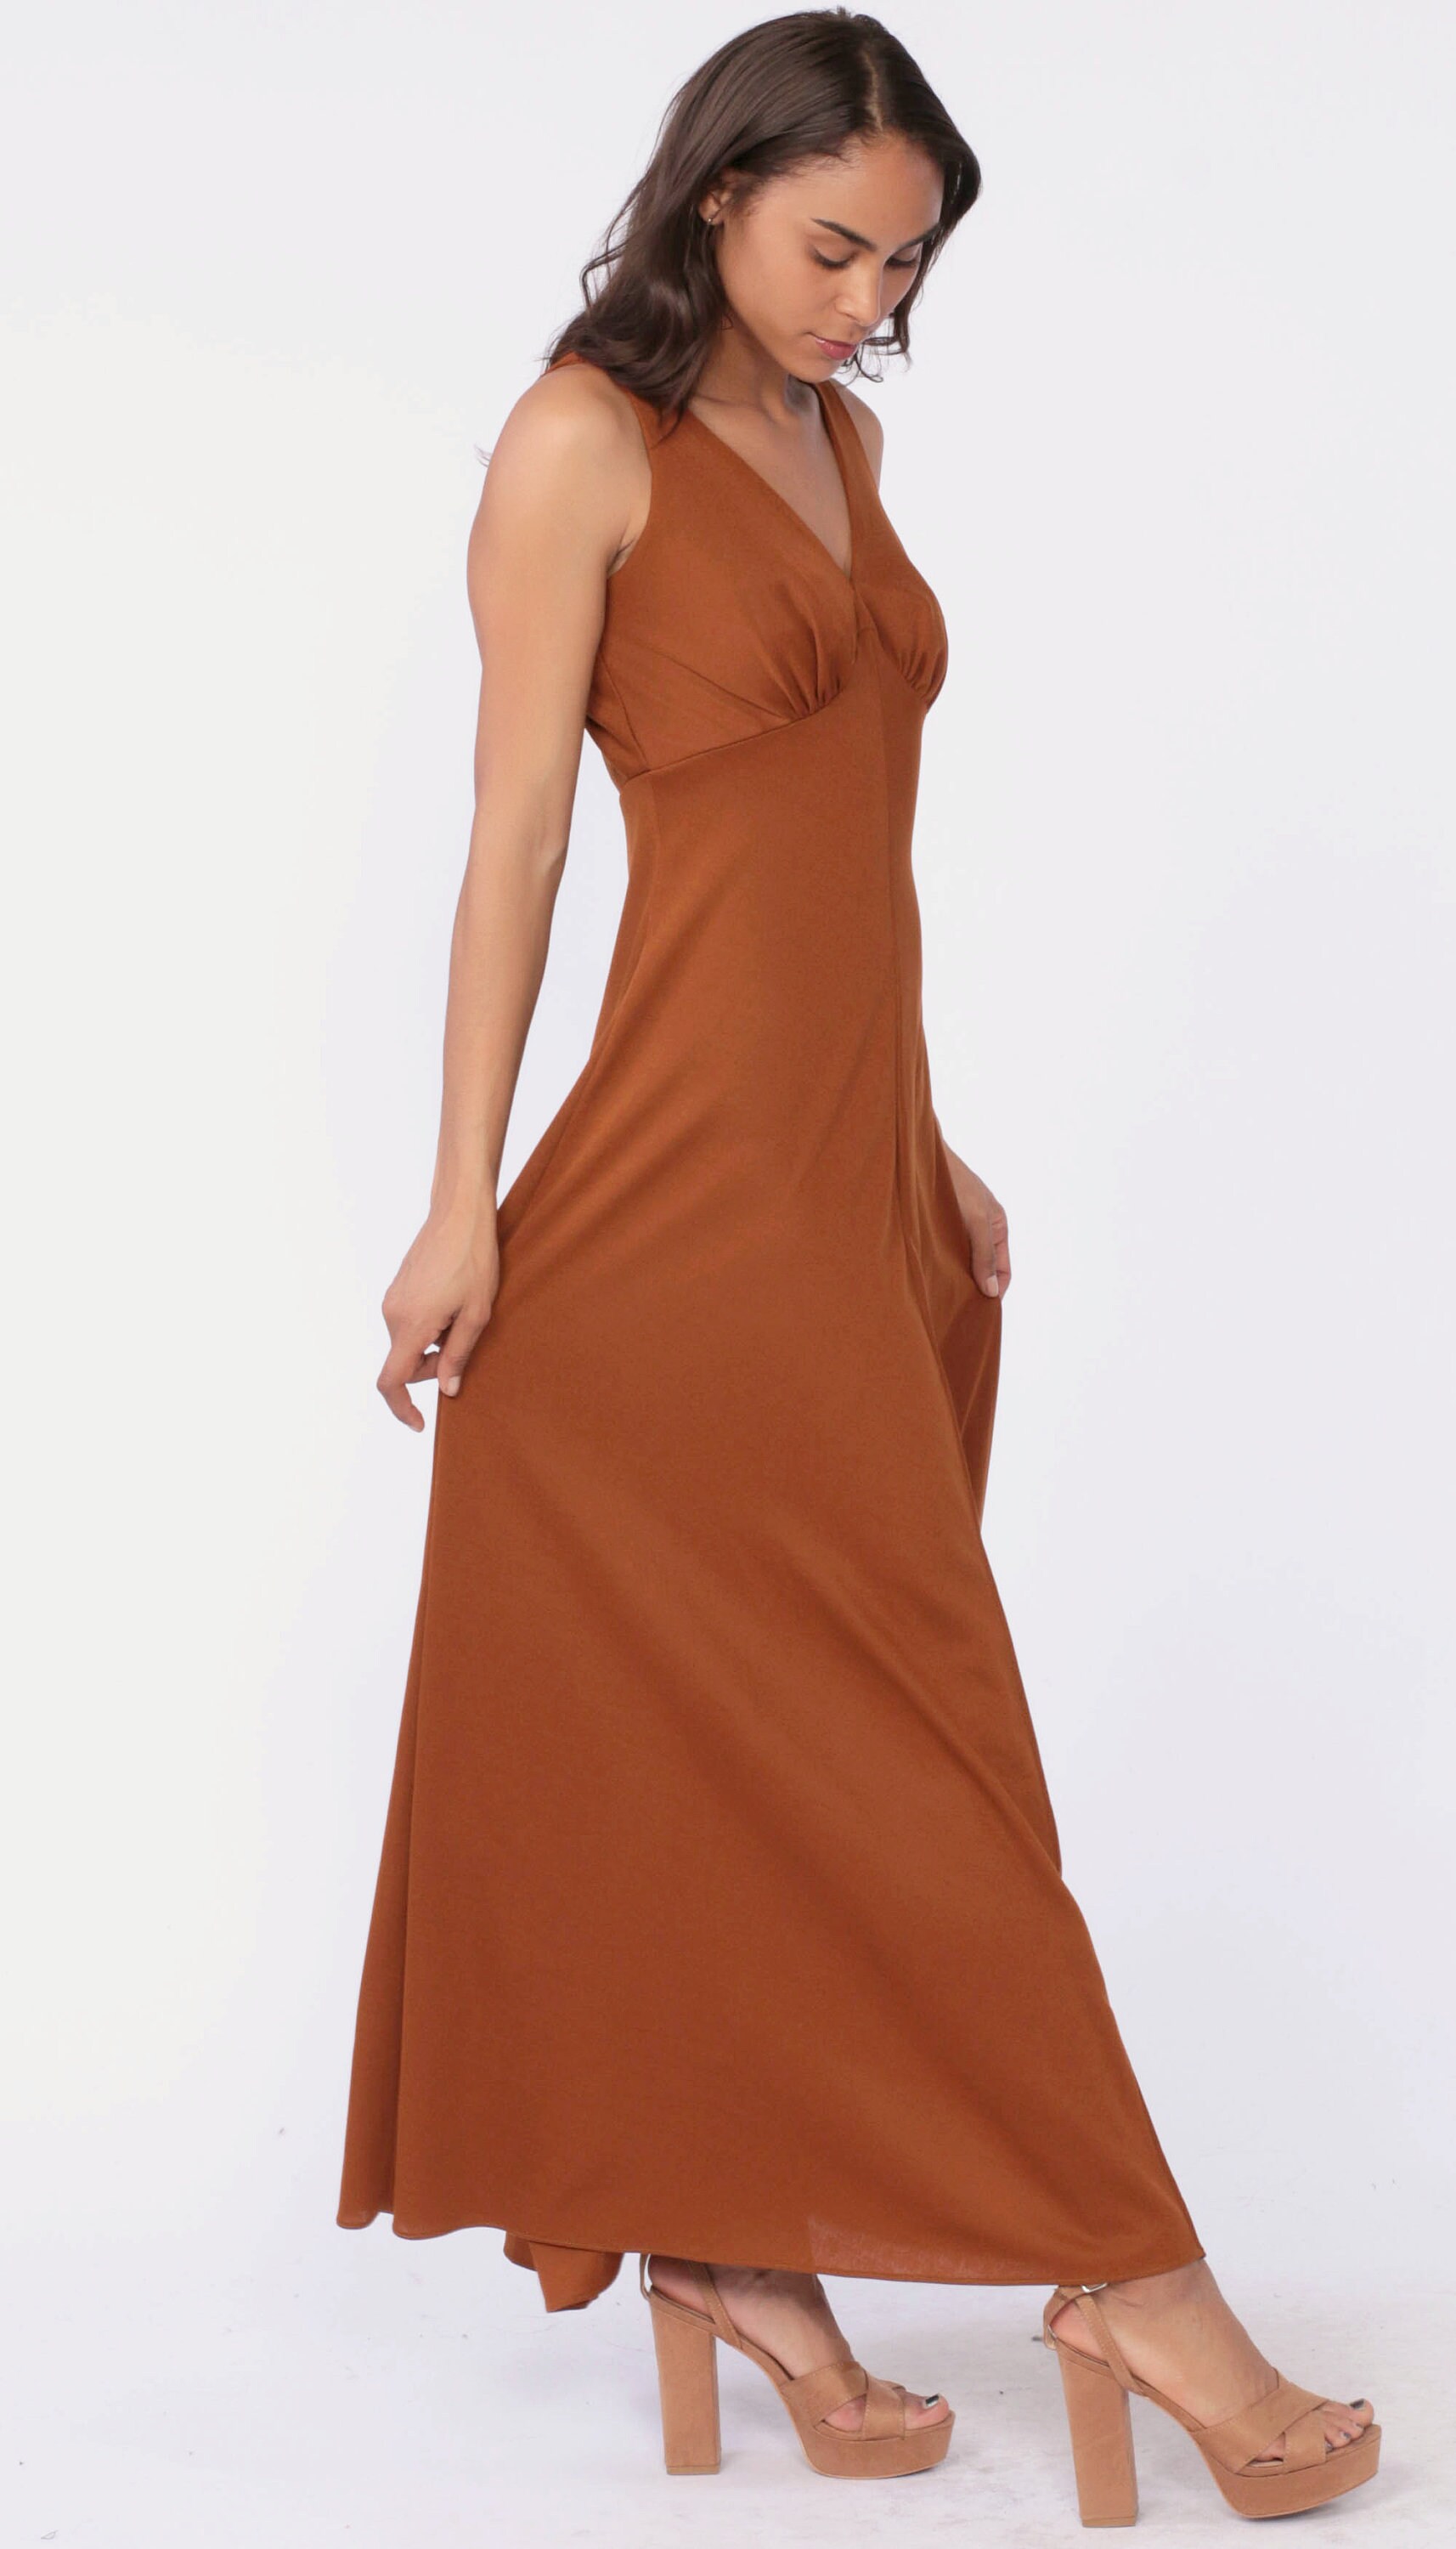 Long Brown Dress 1970s Maxi Party GRECIAN Dress 70s Plunging Neckline ...